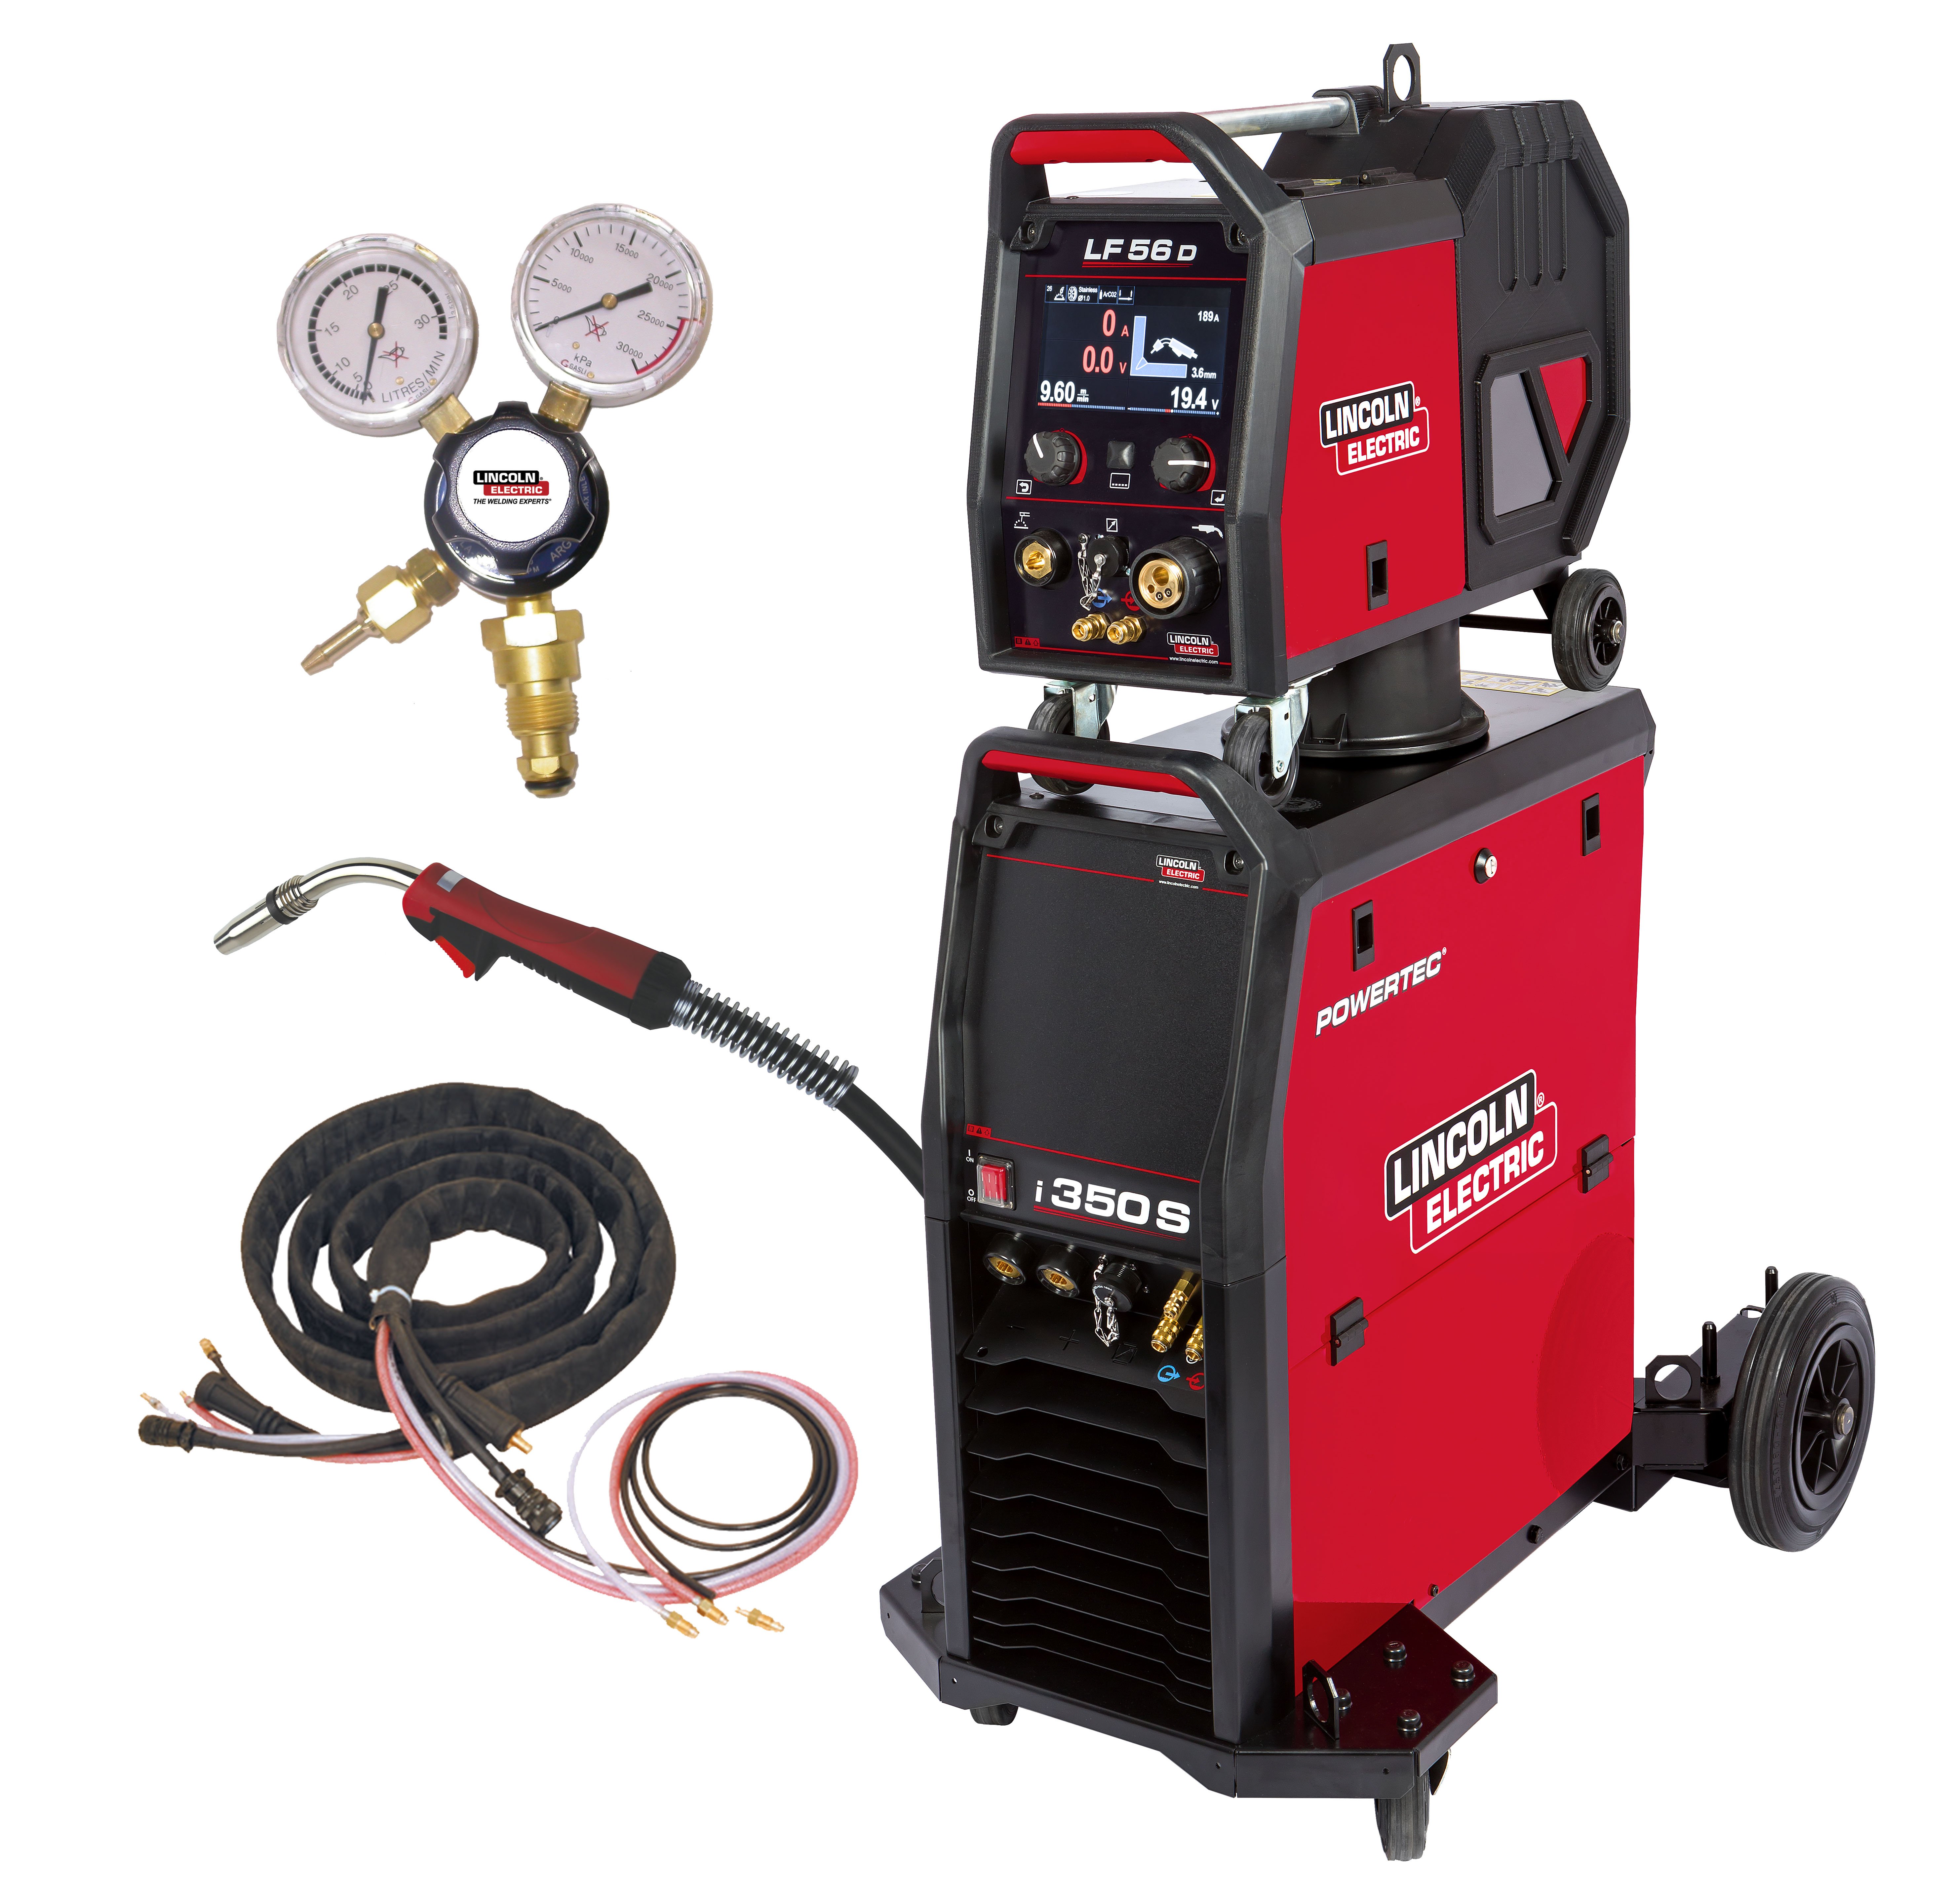 Get Ready-to-Weld with Lincoln Electric Powertec